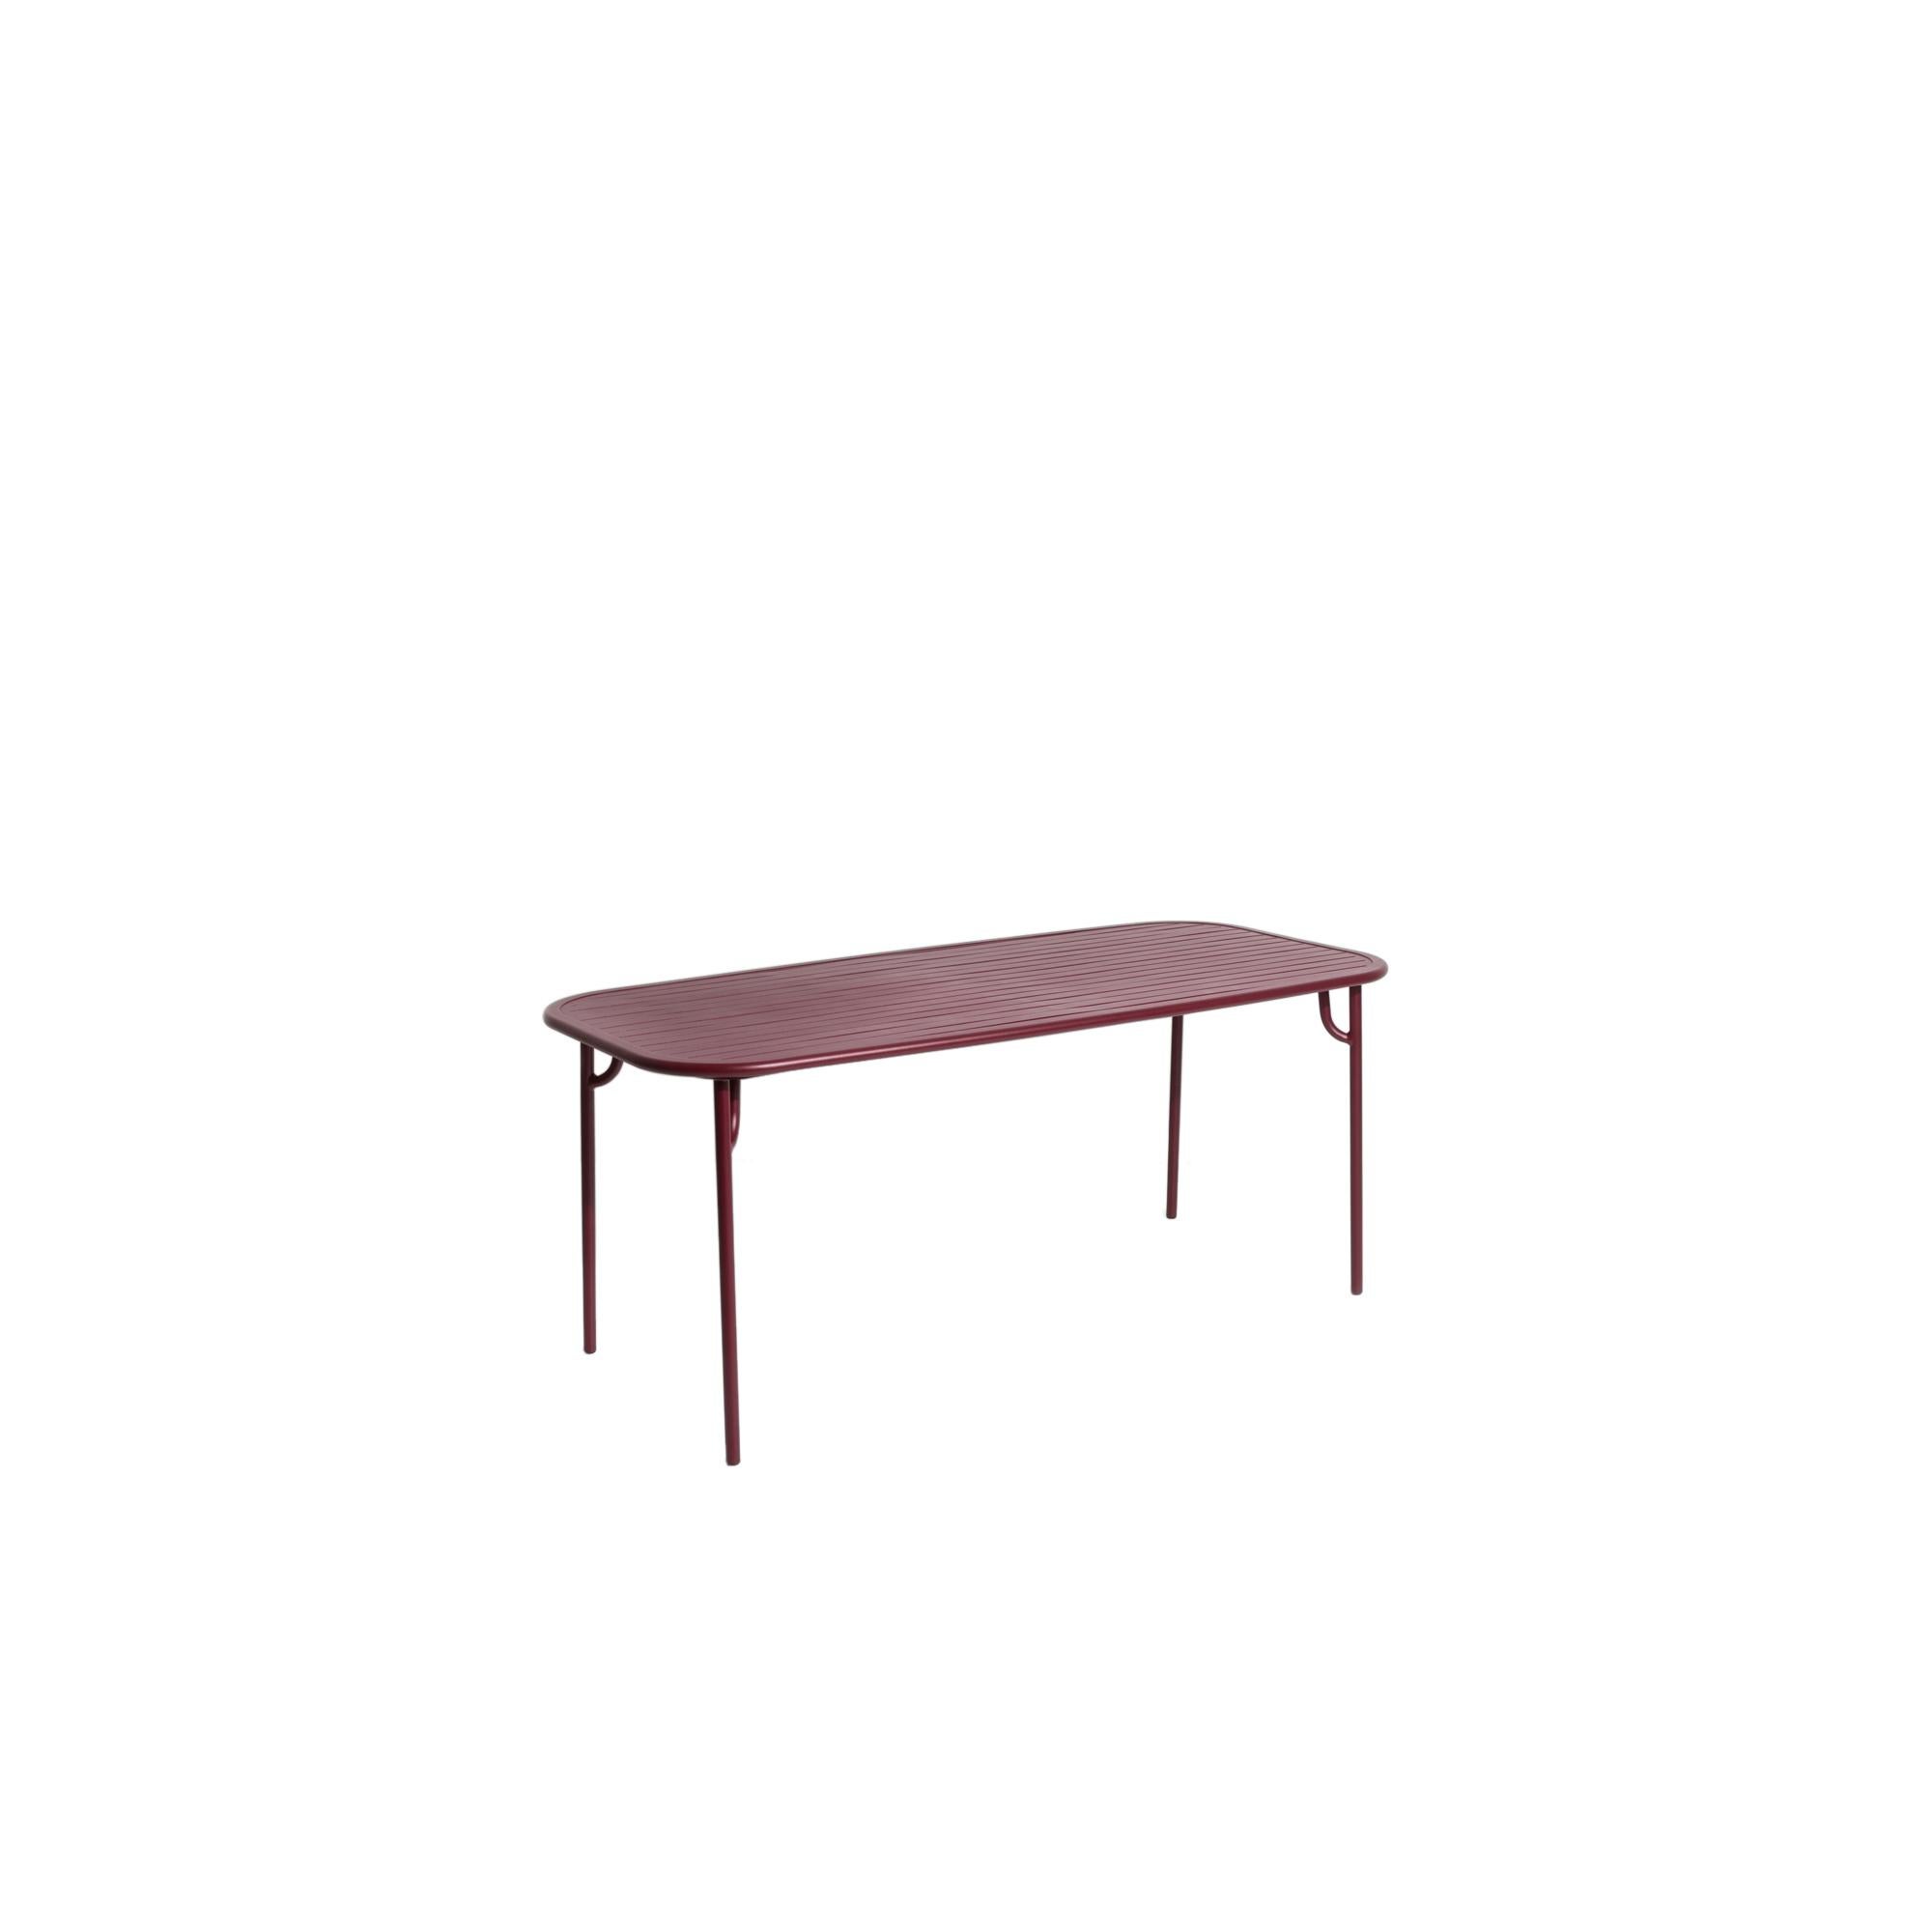 Petite Friture Week-End Medium Rectangular Dining Table in Burgundy Aluminium with Slats by Studio BrichetZiegler, 2017

The week-end collection is a full range of outdoor furniture, in aluminium grained epoxy paint, matt finish, that includes 18